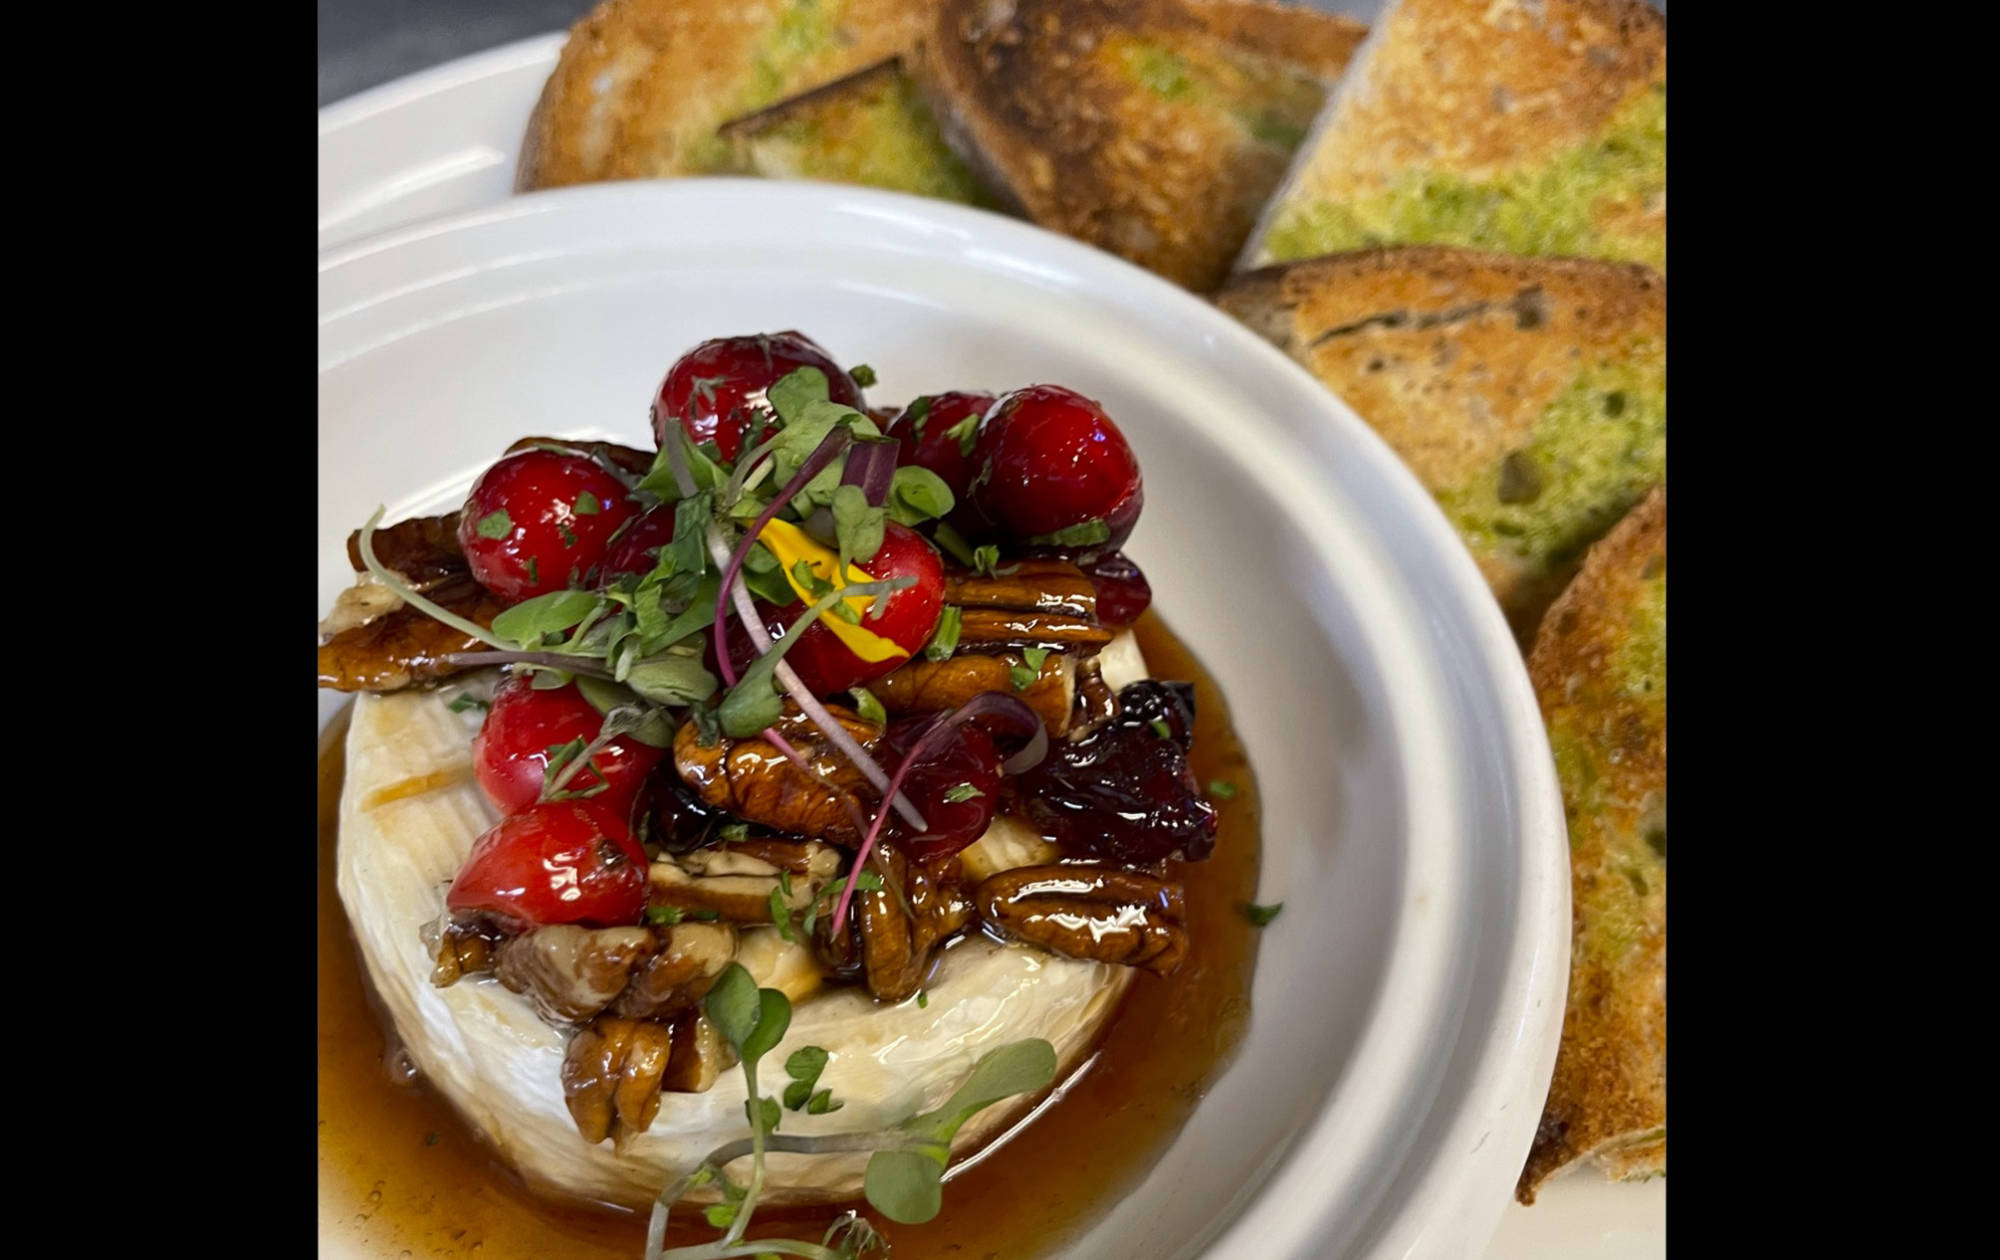 Warm, Baked Brie!